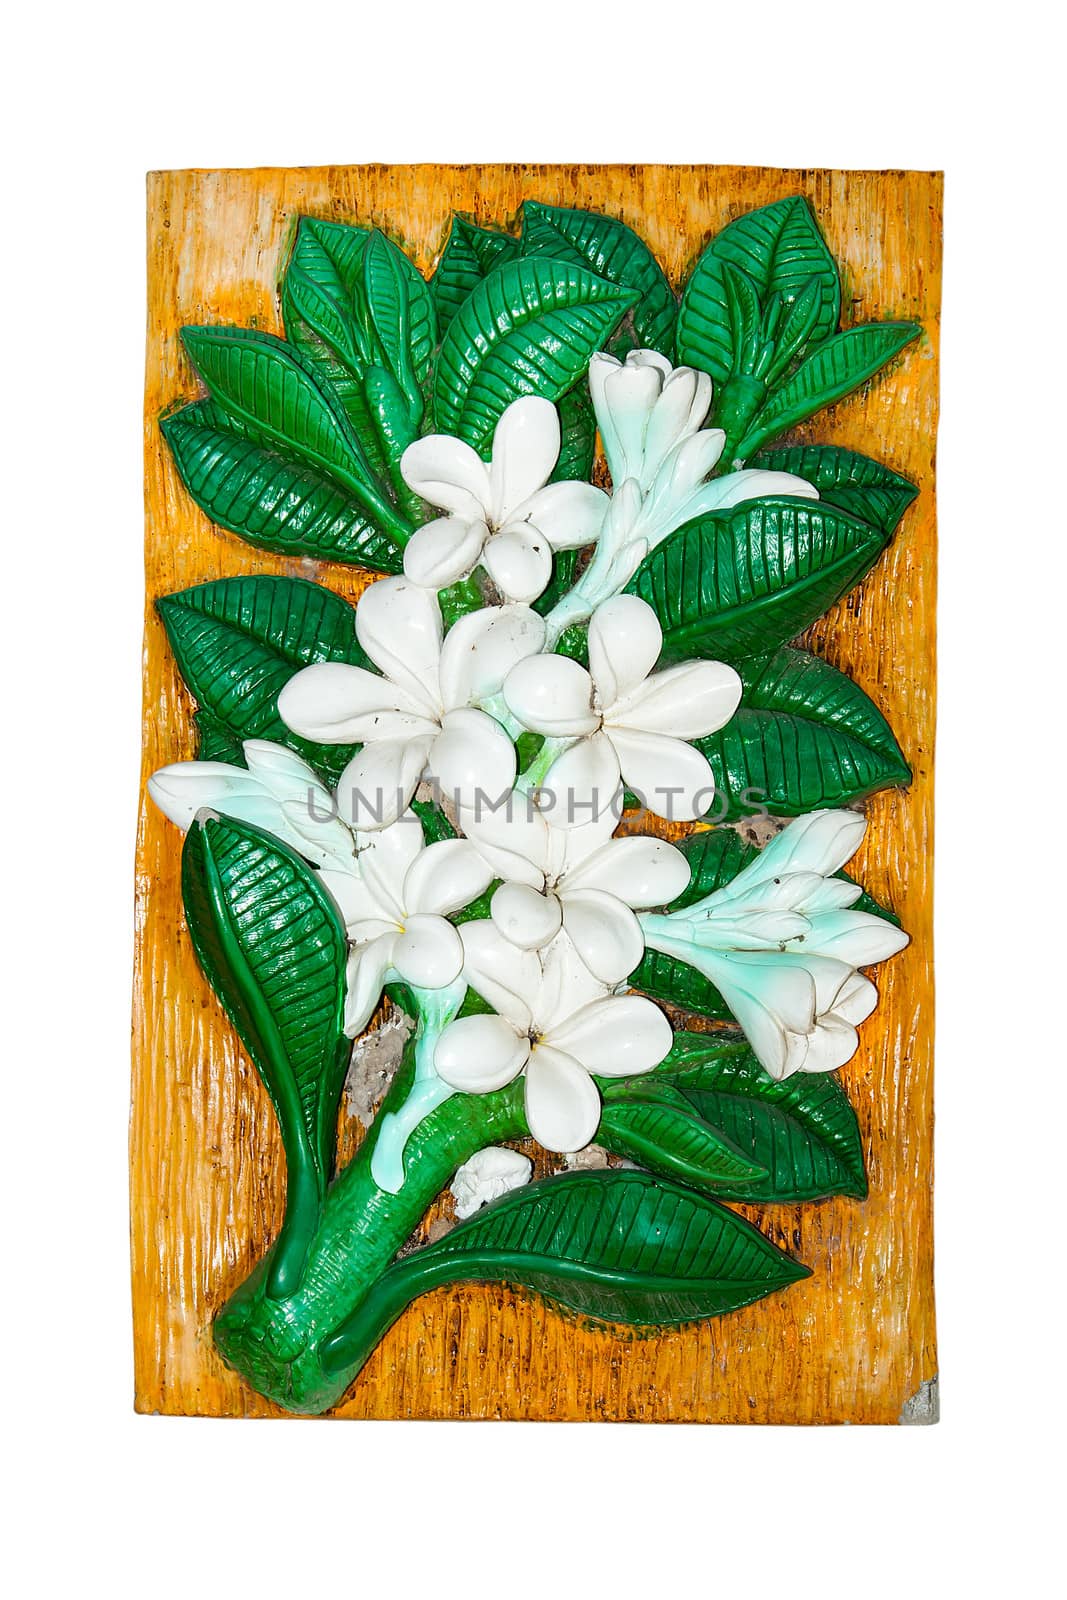 Stucco wall art flower indigenous crafts seen in Thailand.